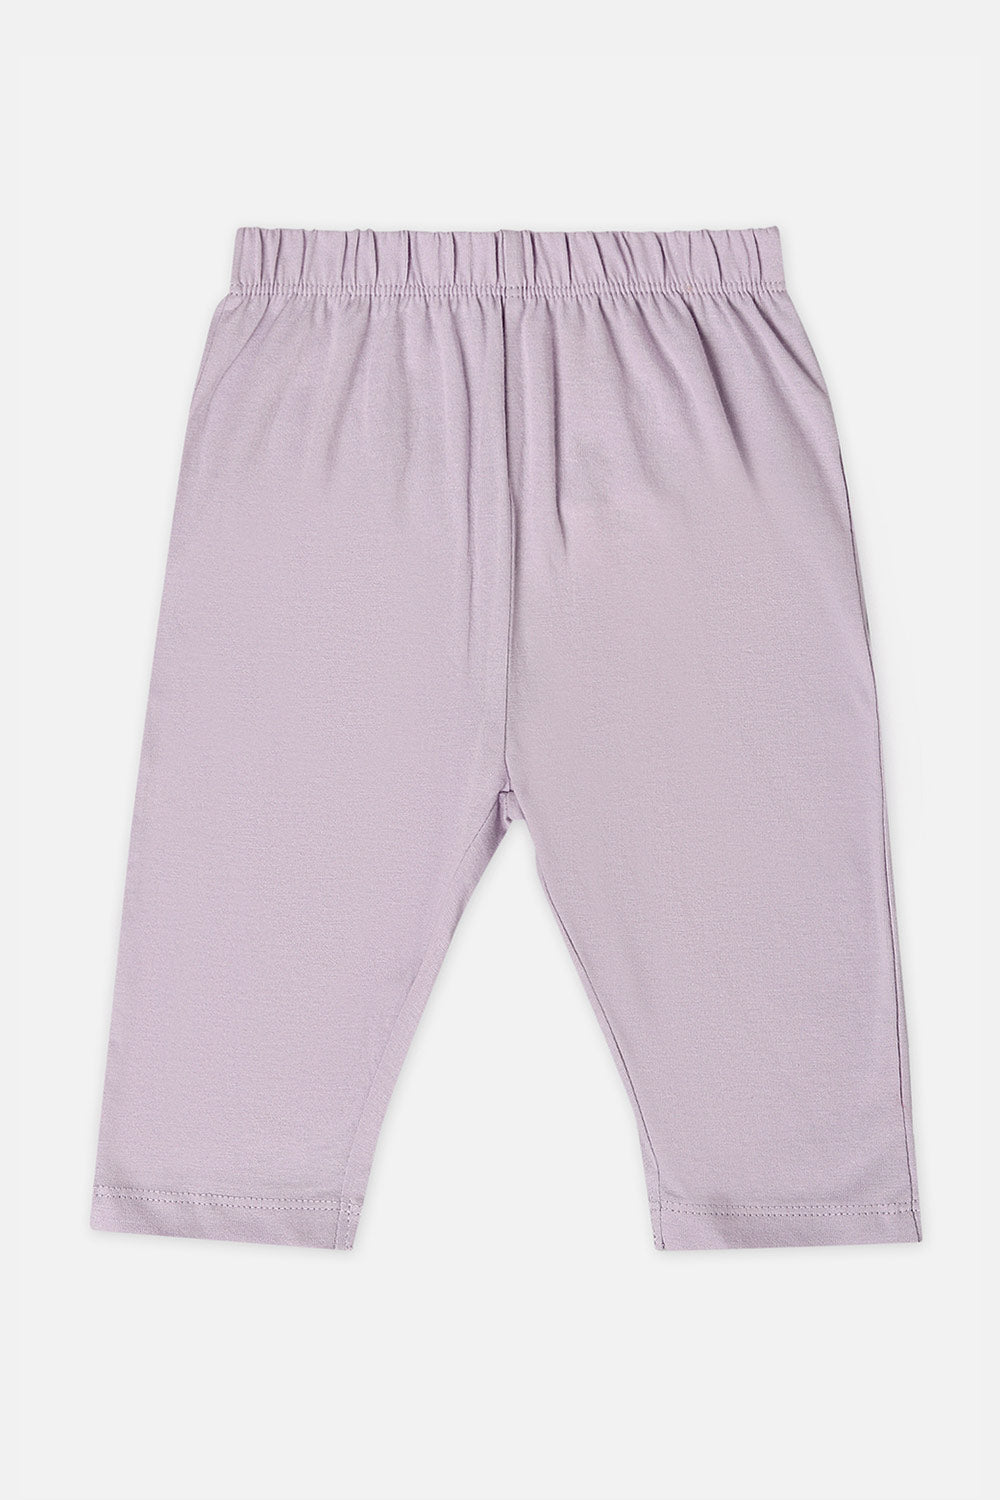 Oh Baby Comfy Pant Lavender-Tr10